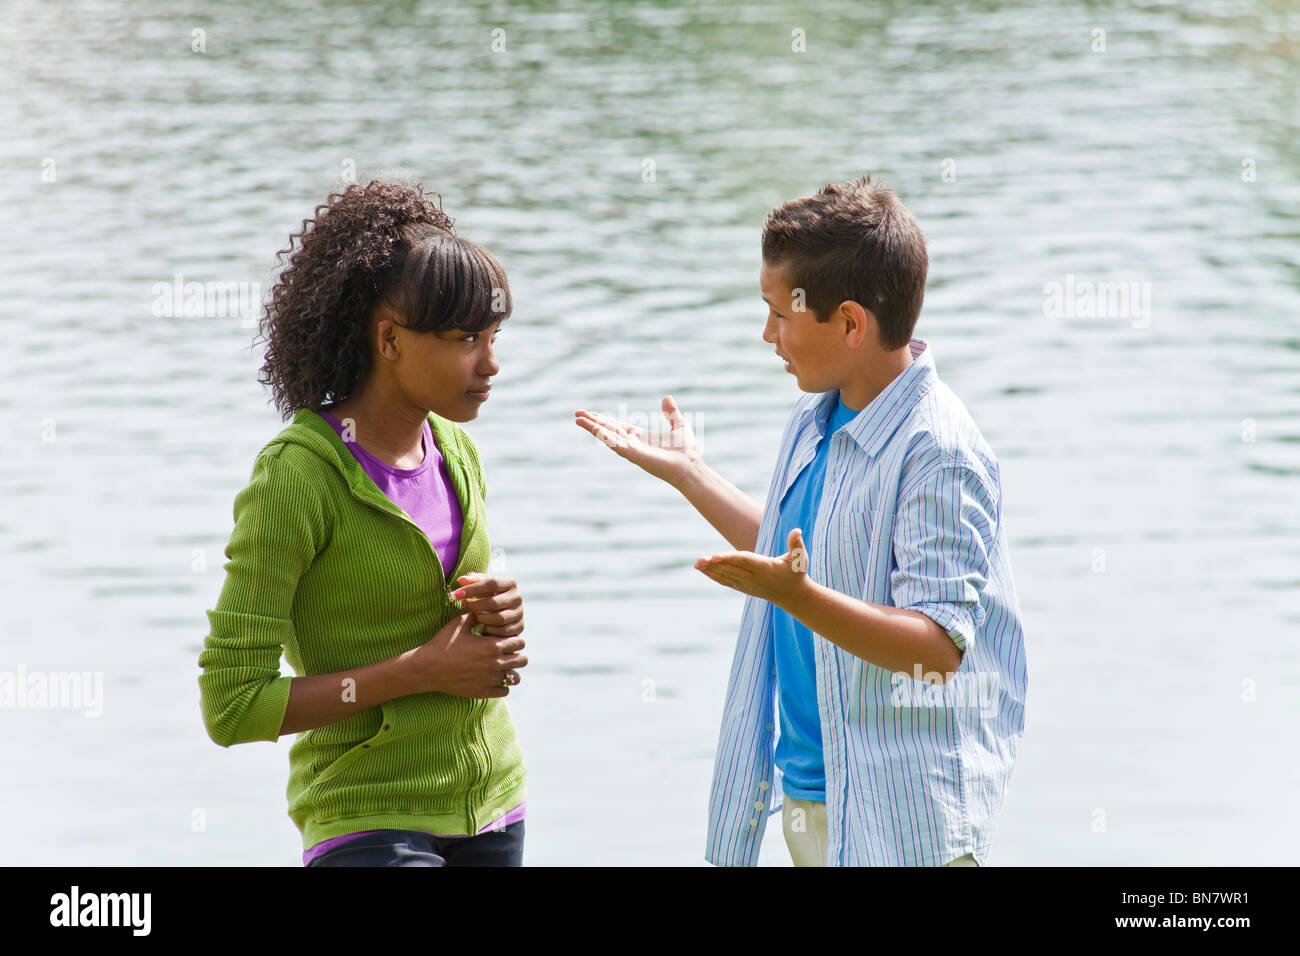 California Ethnically diverse teen kids hanging out talking with enthusiasm and hand gestures. MR ©Myrleen Pearson Stock Photo